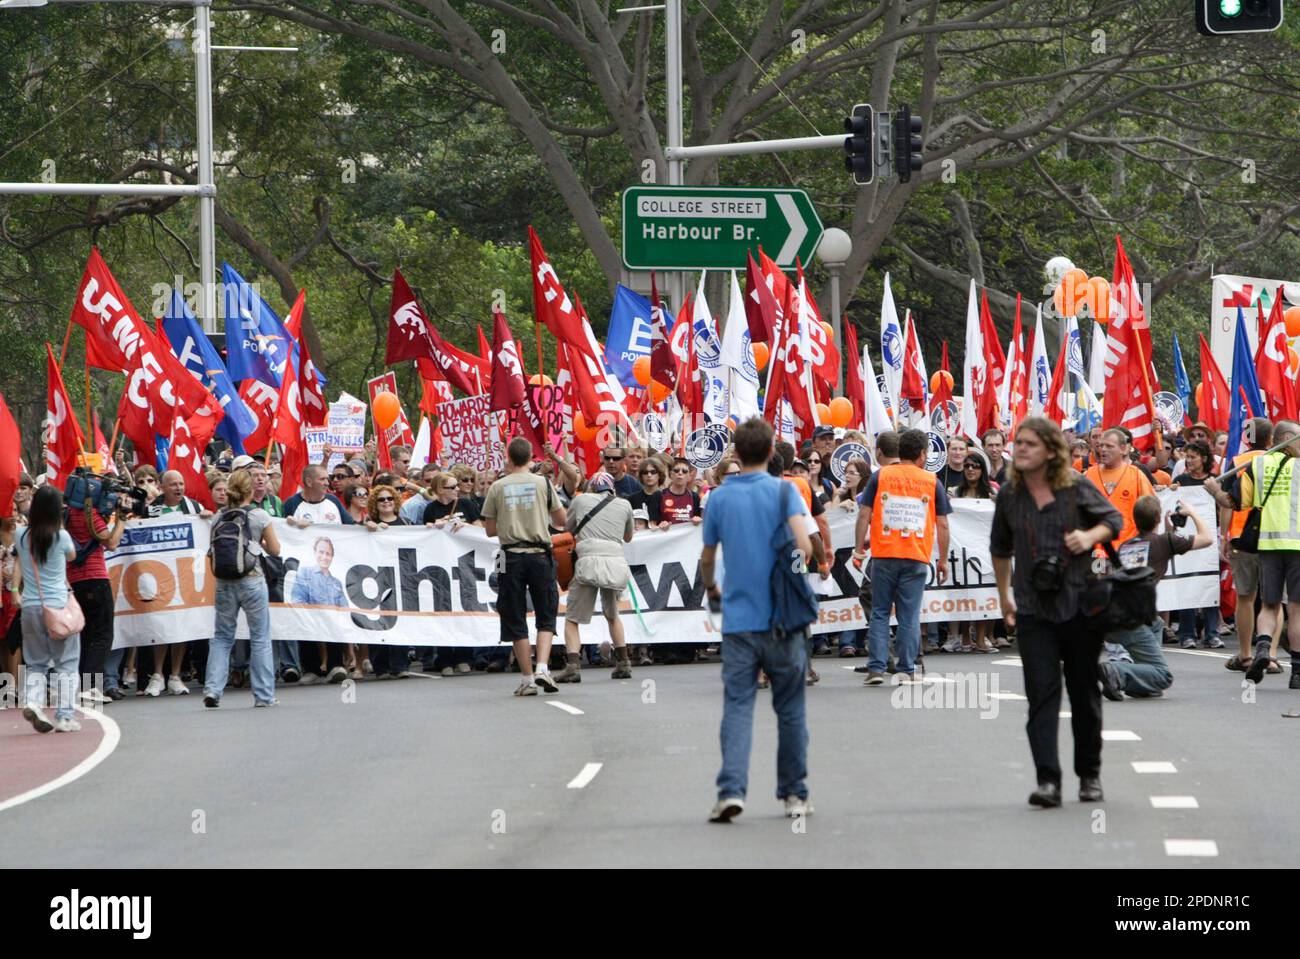 A crowd of 40,000 marches through Sydney in protest at the Liberal (conservative) government’s Industrial Relations policies and changes to workplace laws. The march preceded a concert at the Sydney Cricket Ground that featured a line-up of popular Australian bands. Sydney, Australia. 22.04.07. Stock Photo